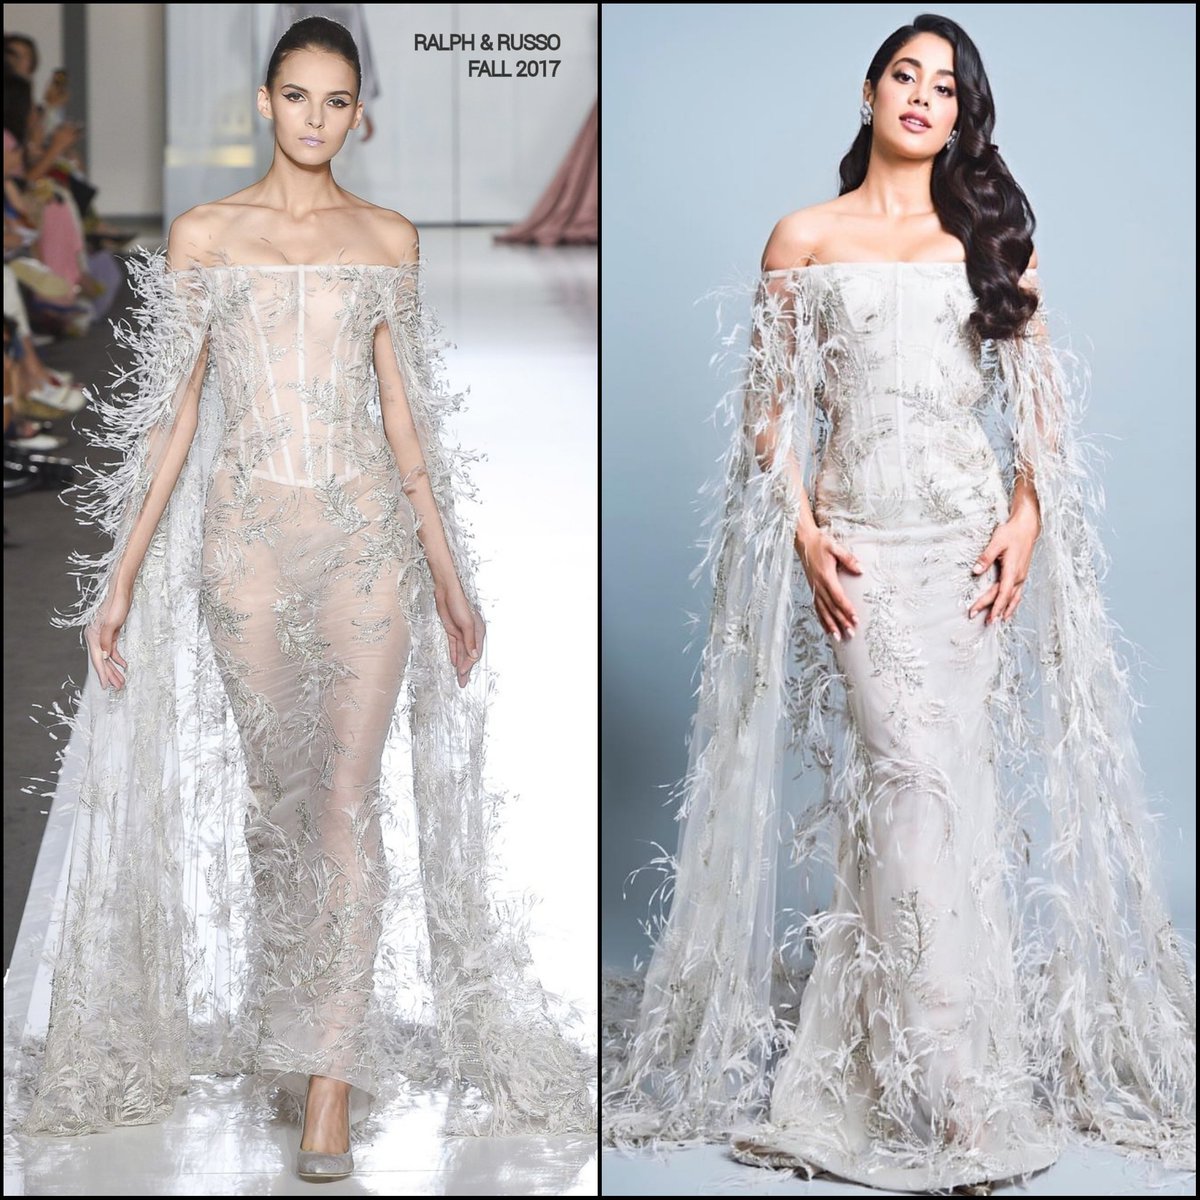 Janhvi-Kapoor-in-Ralph-and-Russo's-Designer-Gown-at-Vogue-Beauty-Awards-2018